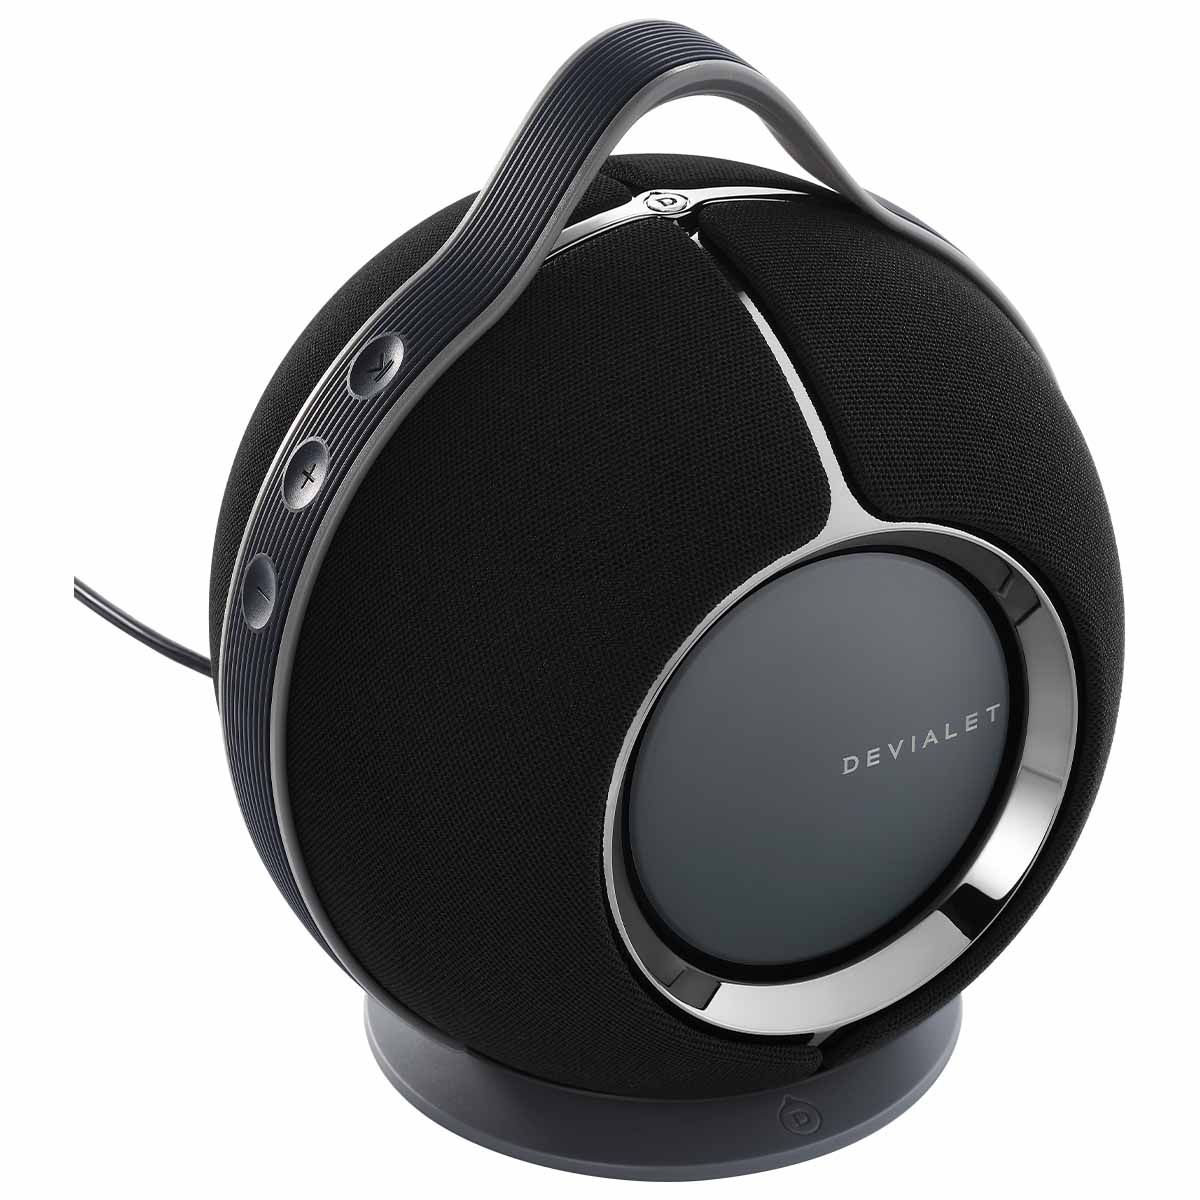 Devialet Mania HiFi Portable Smart Speaker - angled top view with optional charging base